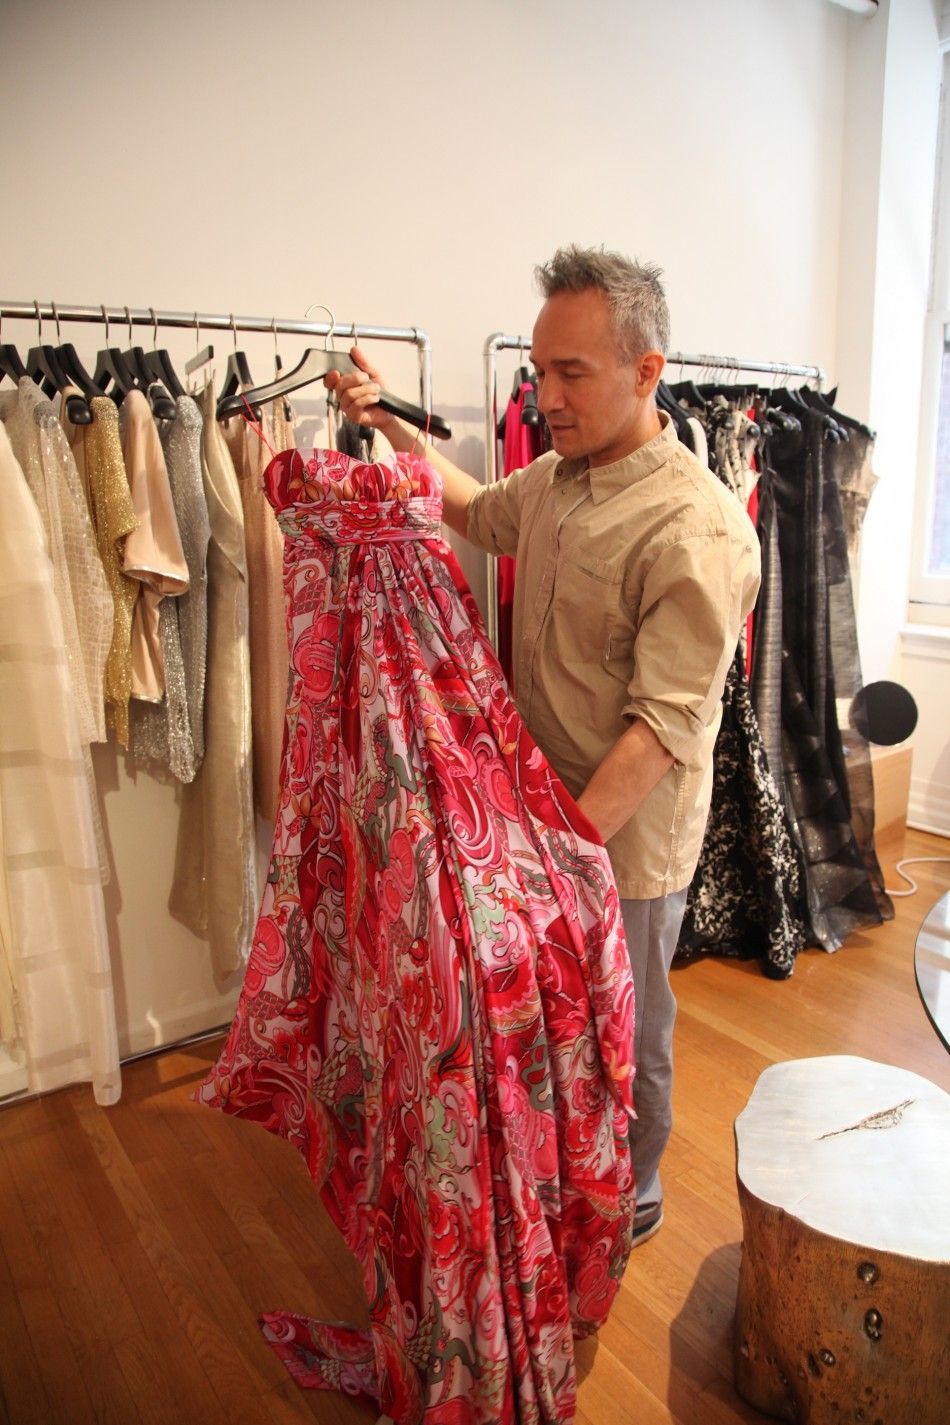 Cesar Galindo shows off his spring 2013 collection, Czar by Cesar Galindo, in his studio ahead of Mercedes-Benz Fashion Week in New York.